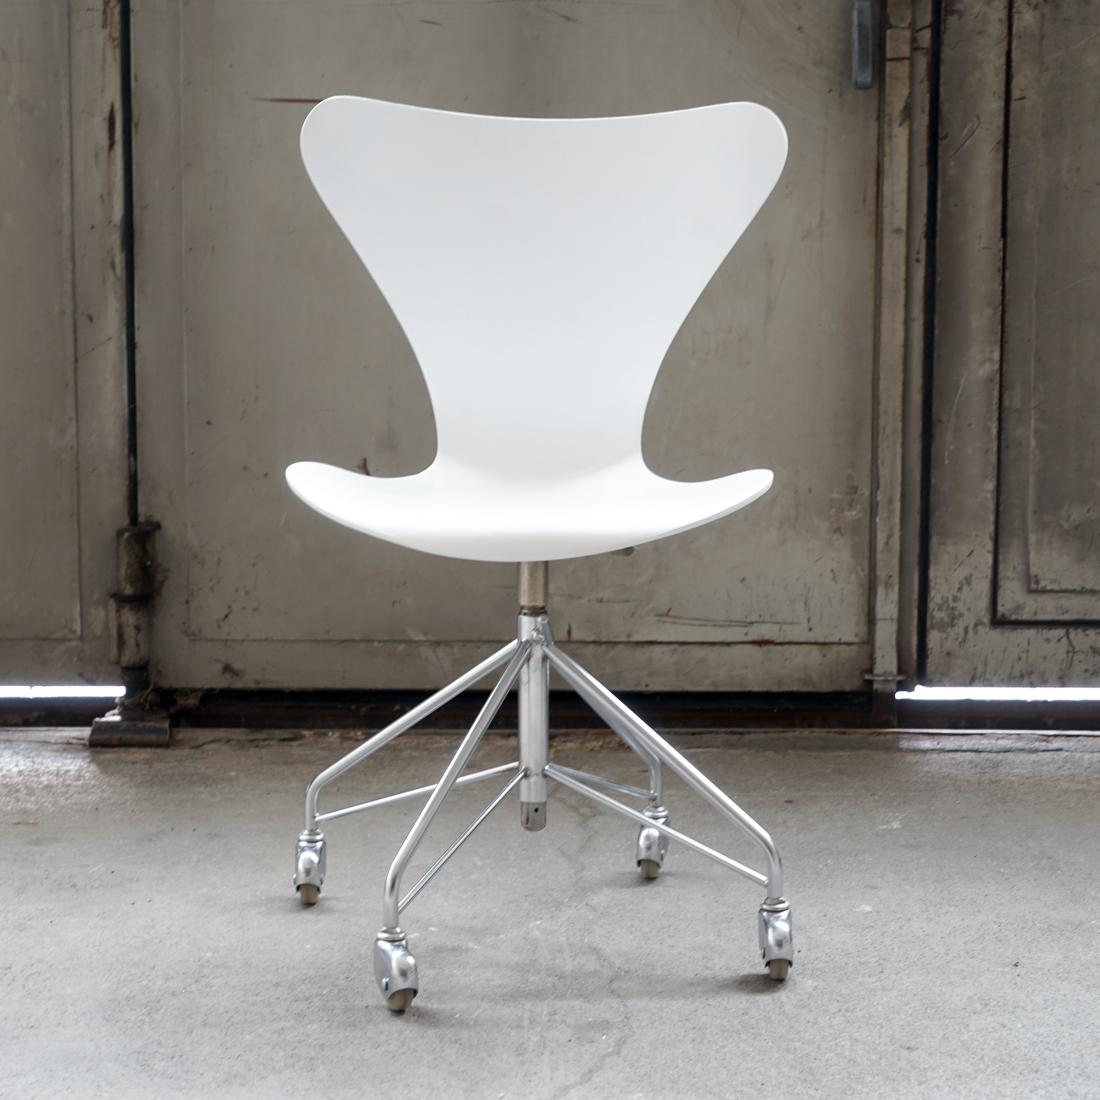 This chair was designed by Arne Jacobsen manufactured by Fritz Hansen in the 1970s. The seat and back are formed from a white painted laminate and shows the typical design of this model. All parts such as the castors, rubber wheels and rubber seat